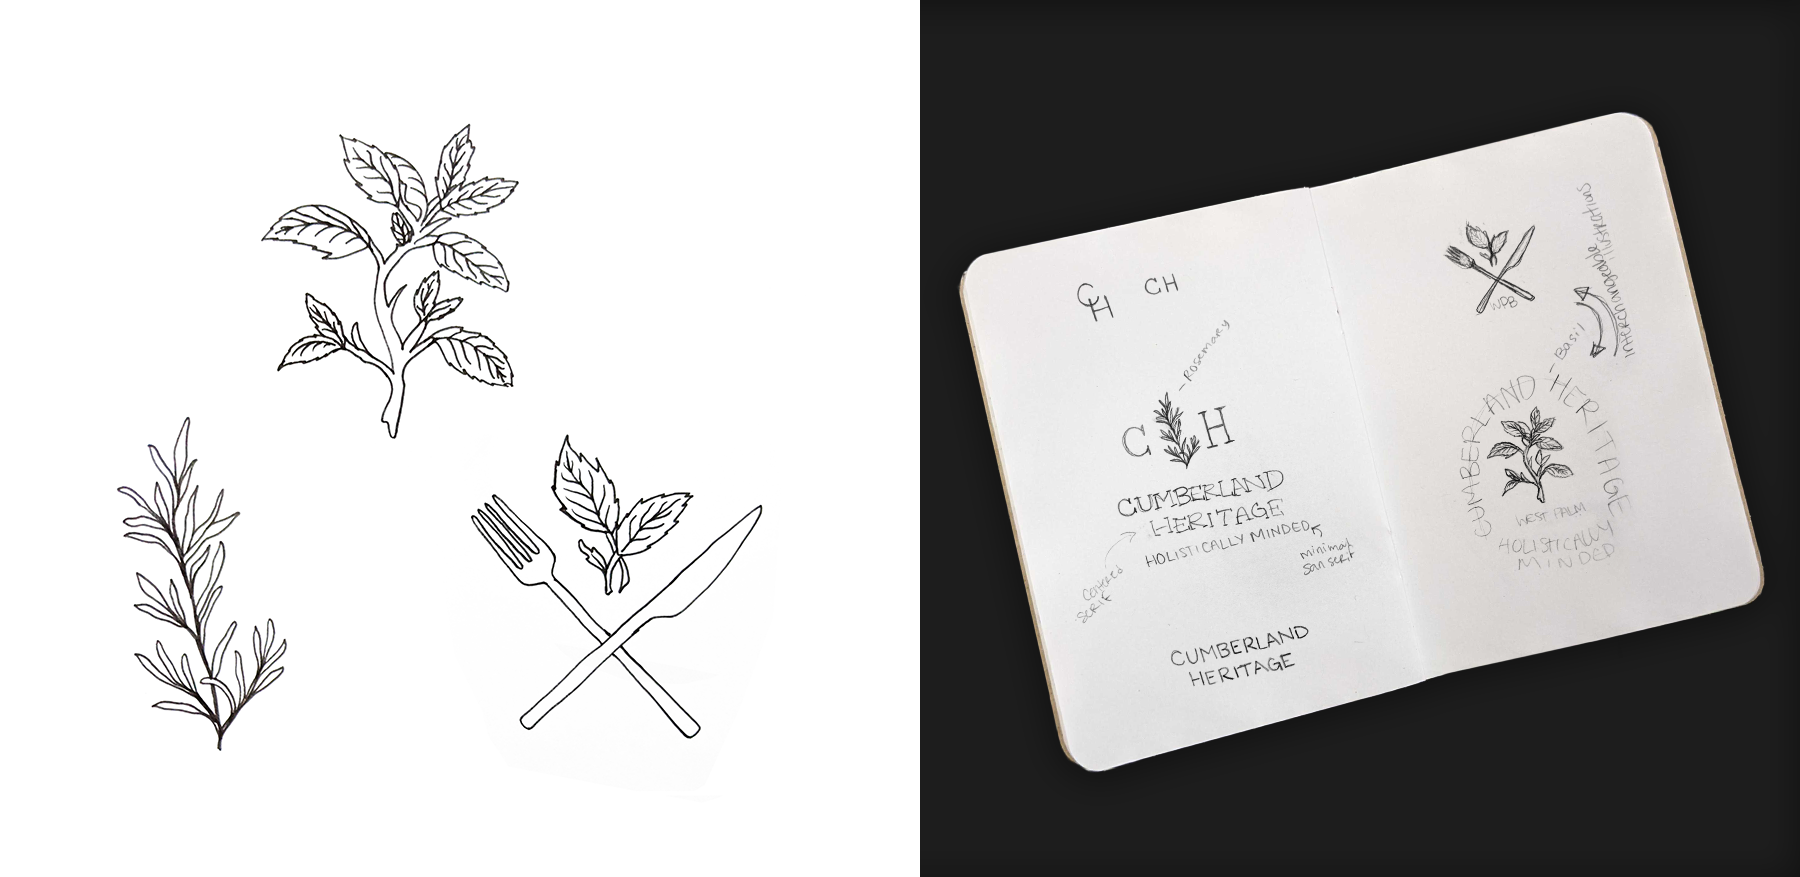 Process sketches of the rosemary sprig, mint leaves and cutlery illustrations we created for Cumberland Heritage along with rough logo lockup sketches.